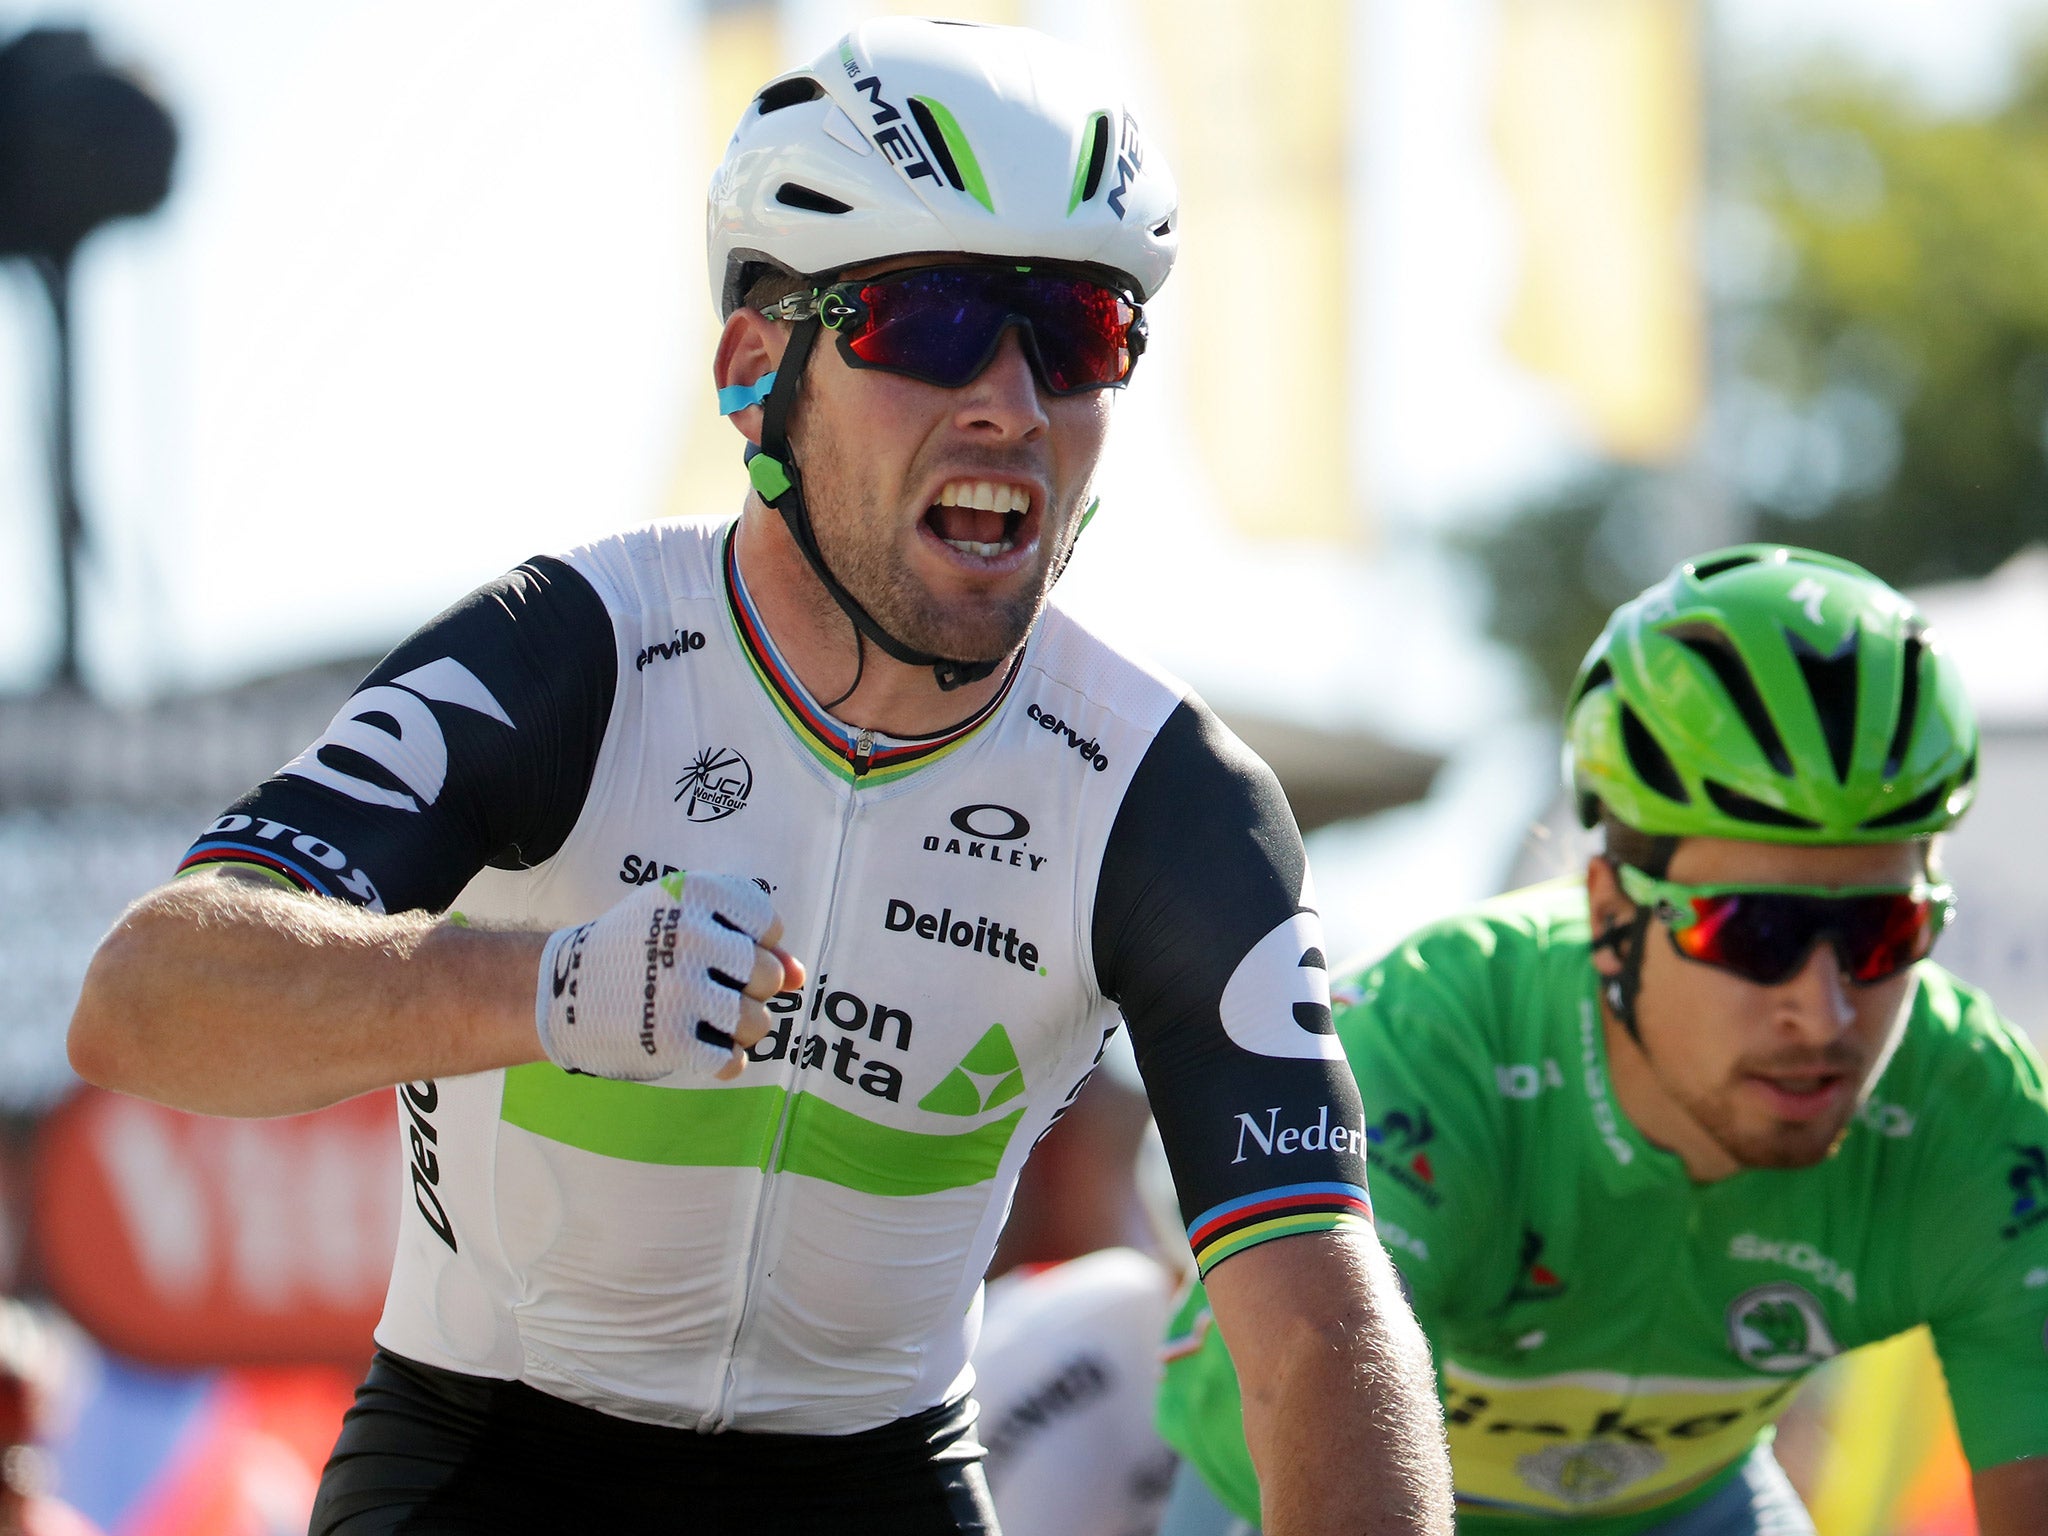 Mark Cavendish has withdrawn from the Tour de France to focus on the Rio 2016 Olympics